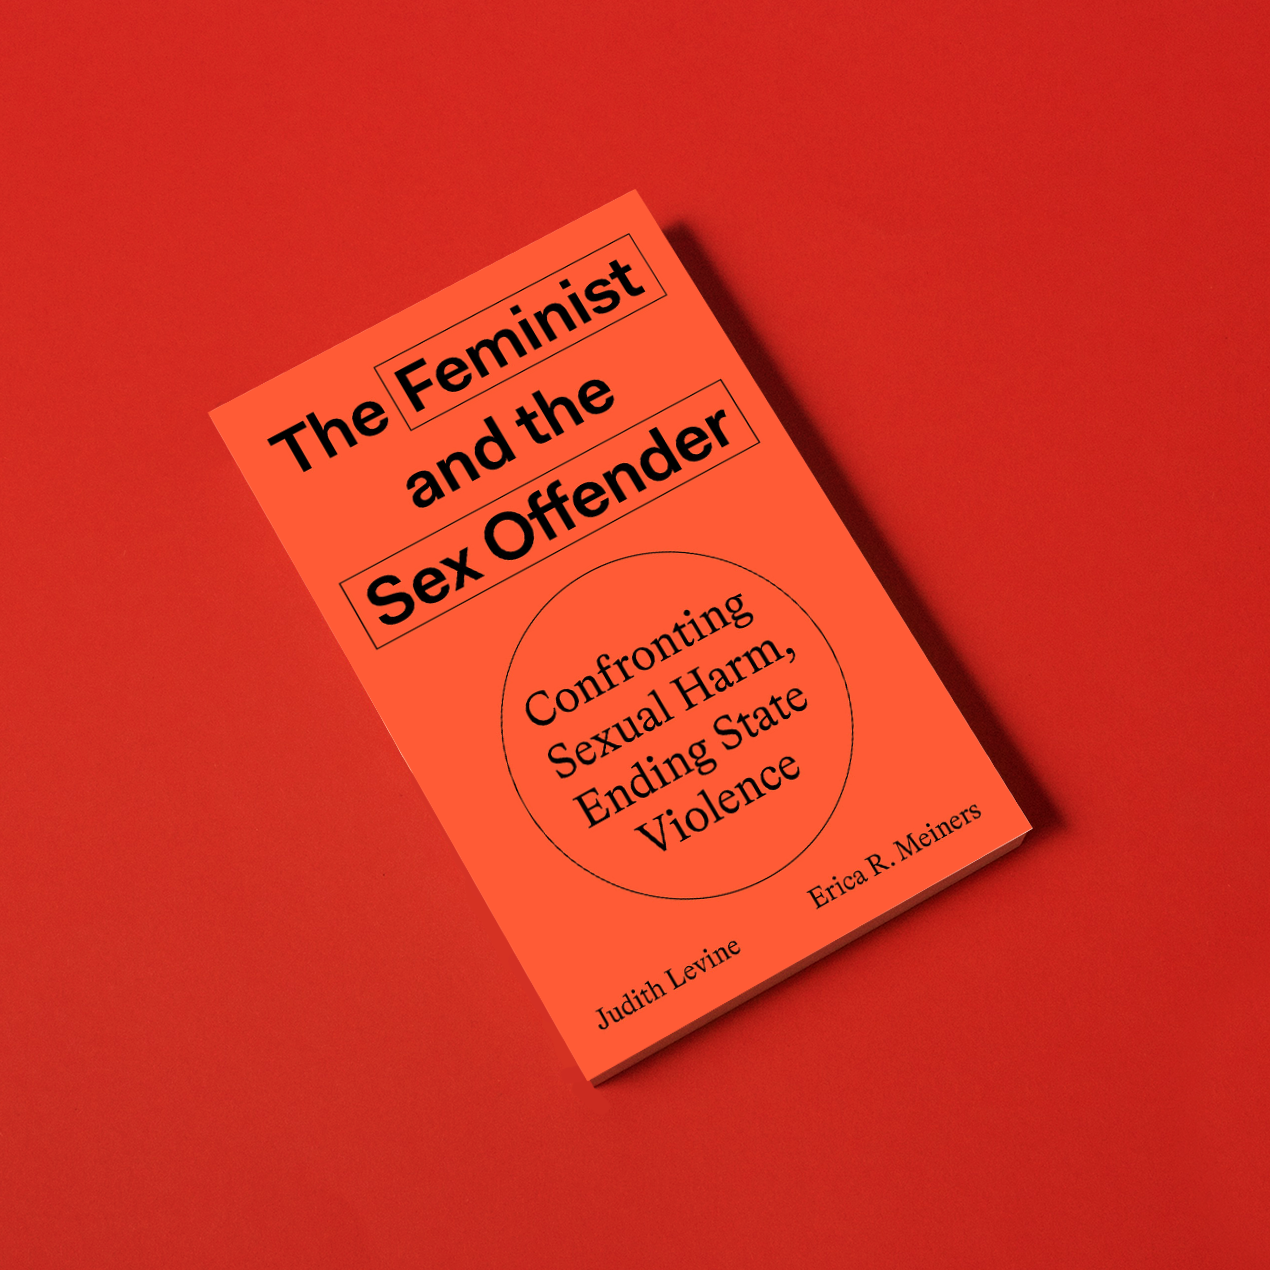 The Feminist and the Sex Offender, by Judith Levine and Erica Meiners